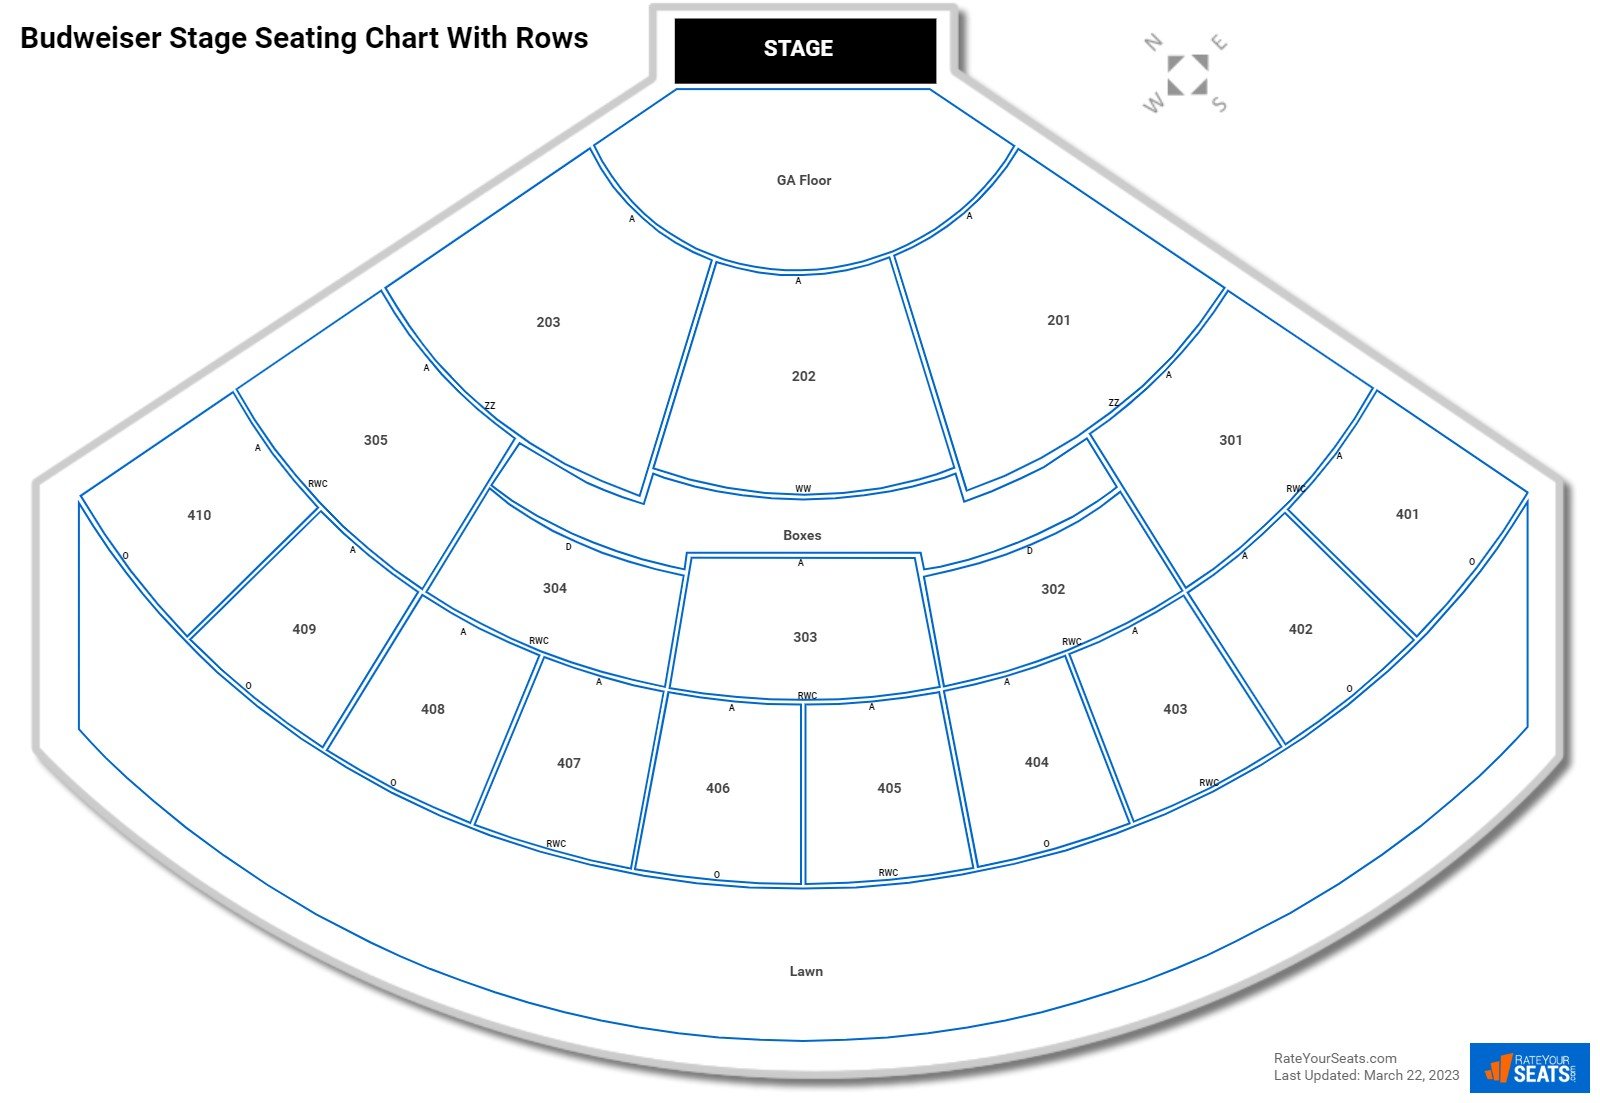 Budweiser Stage seating chart with row numbers